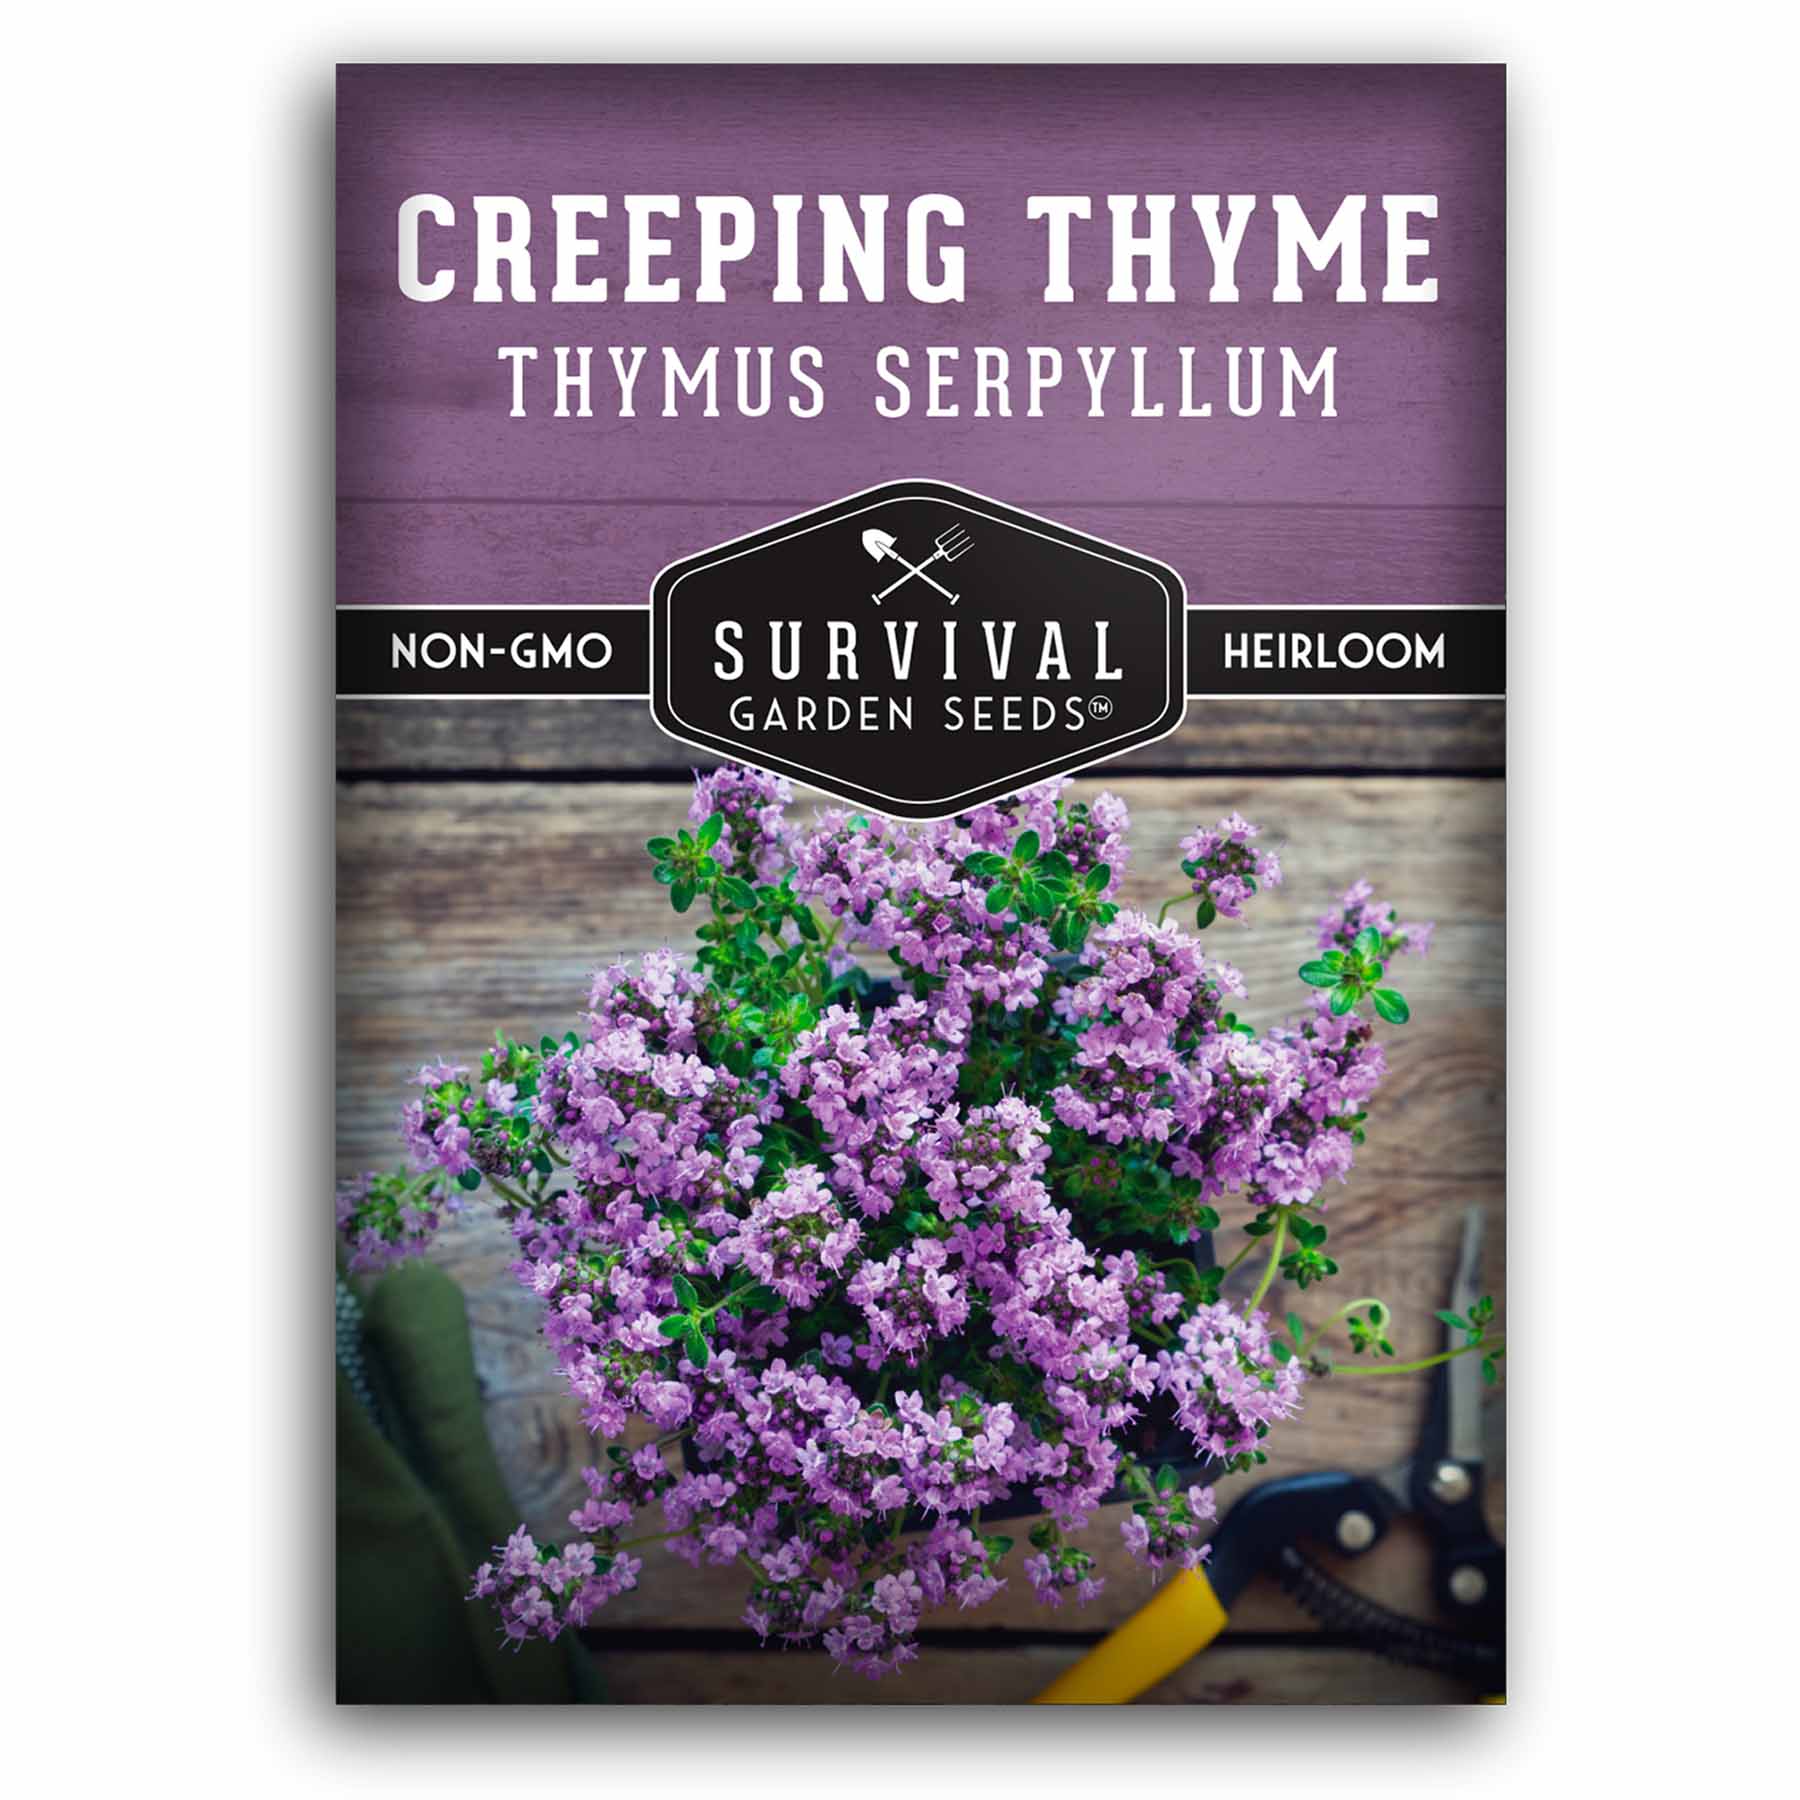 1 packet of Creeping Thyme seeds